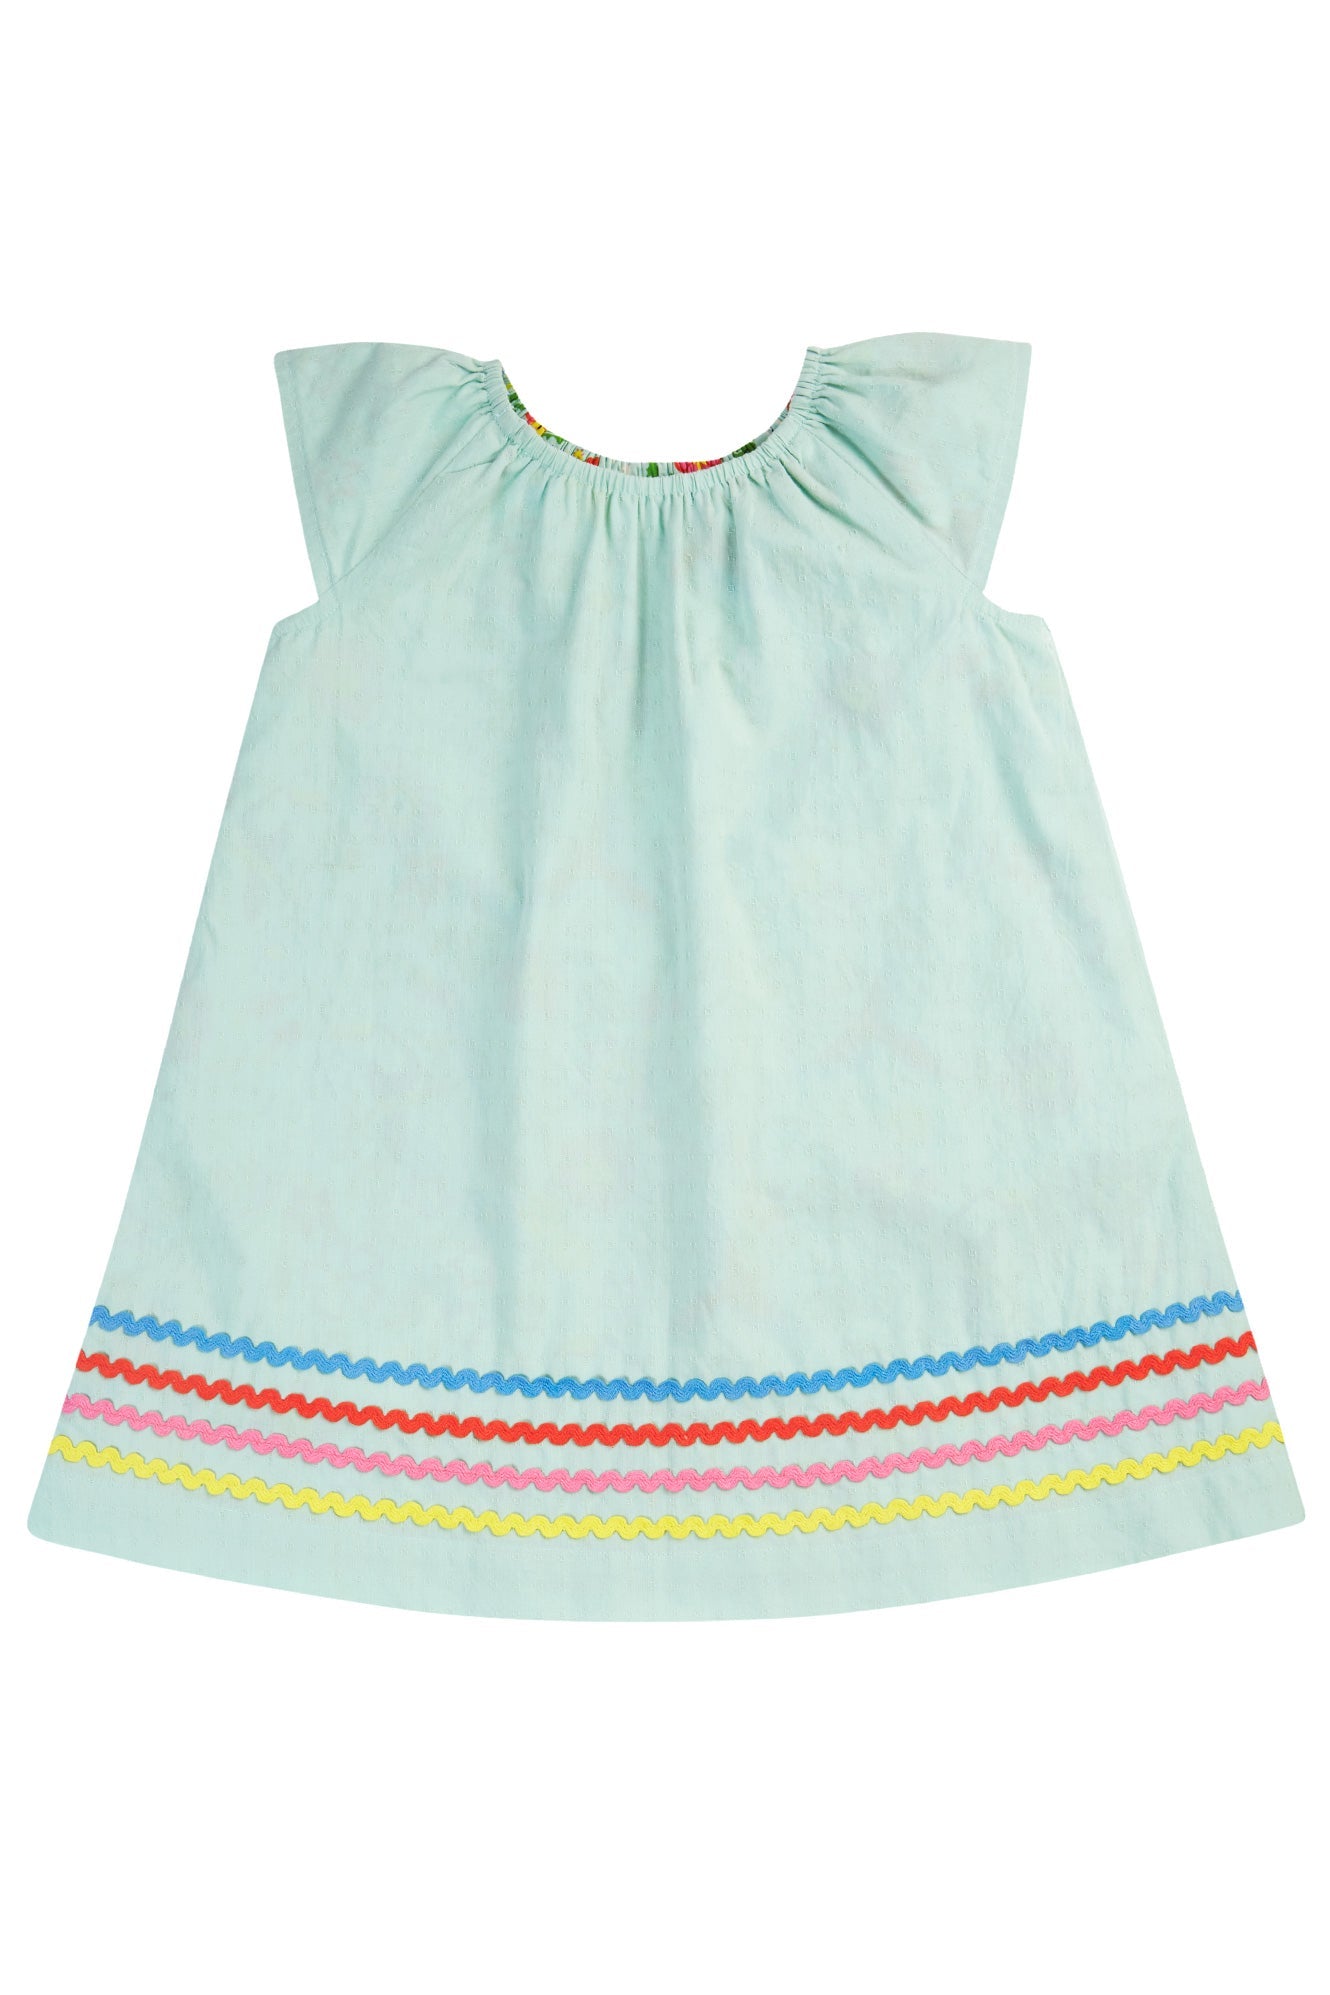 Frugi Lowen Reversible Dress - Tropical Birds/Spring Dobby-Kids-Ohh! By Gum - Shop Sustainable